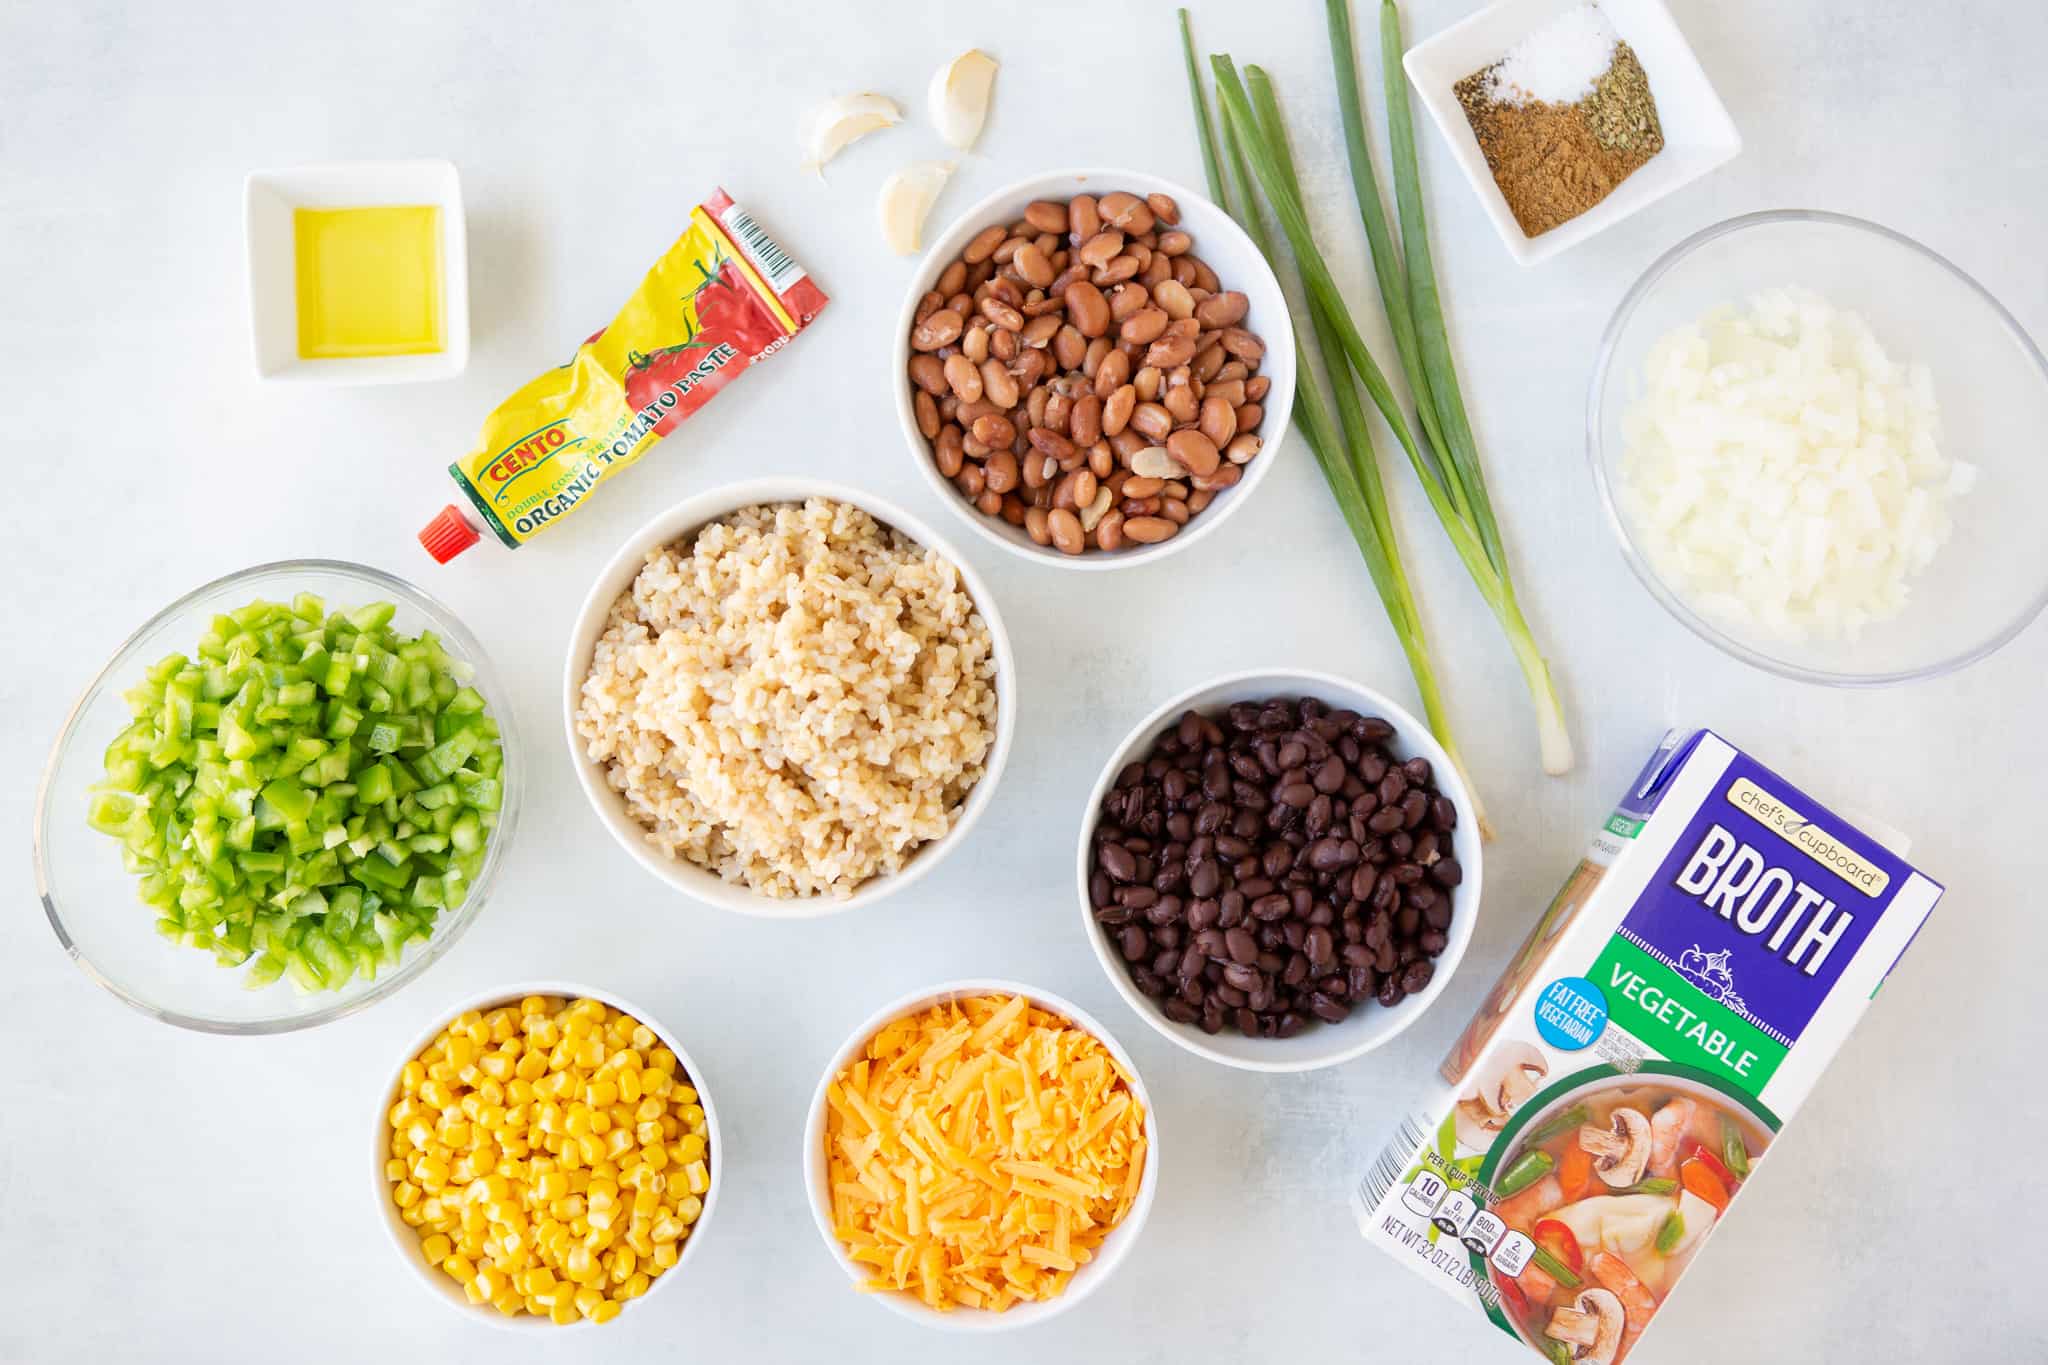 Vegetarian bean and rice casserole ingredients